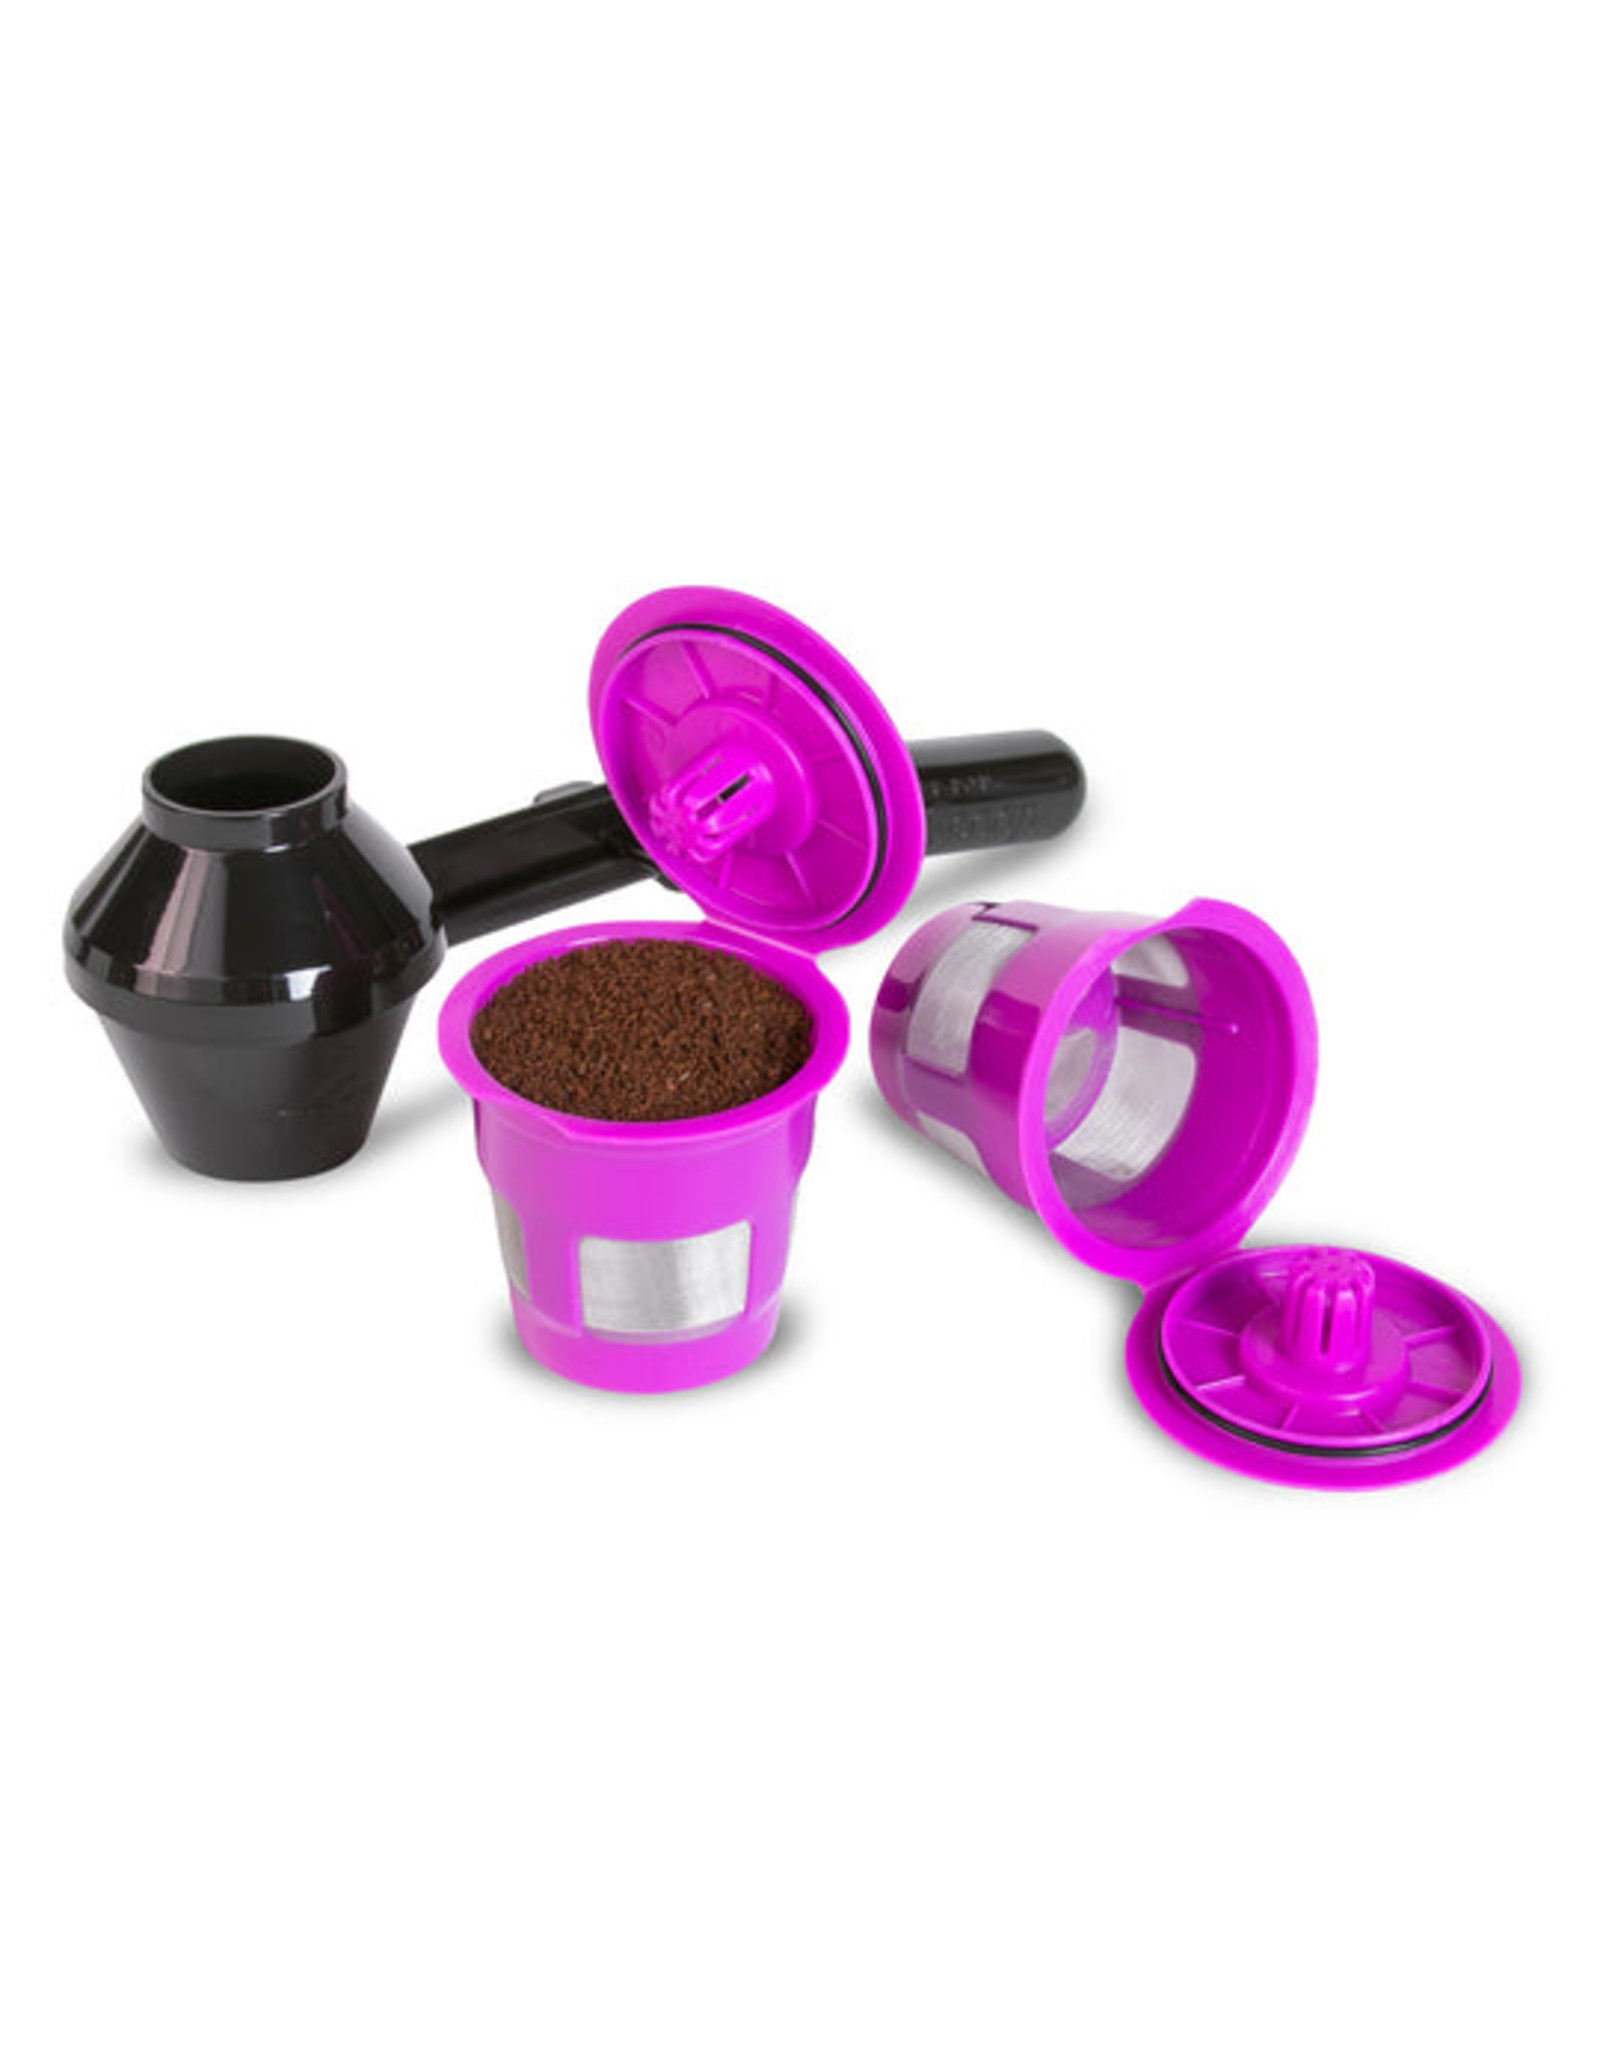 Cafe Fill Value Pack with EZ-Scoop